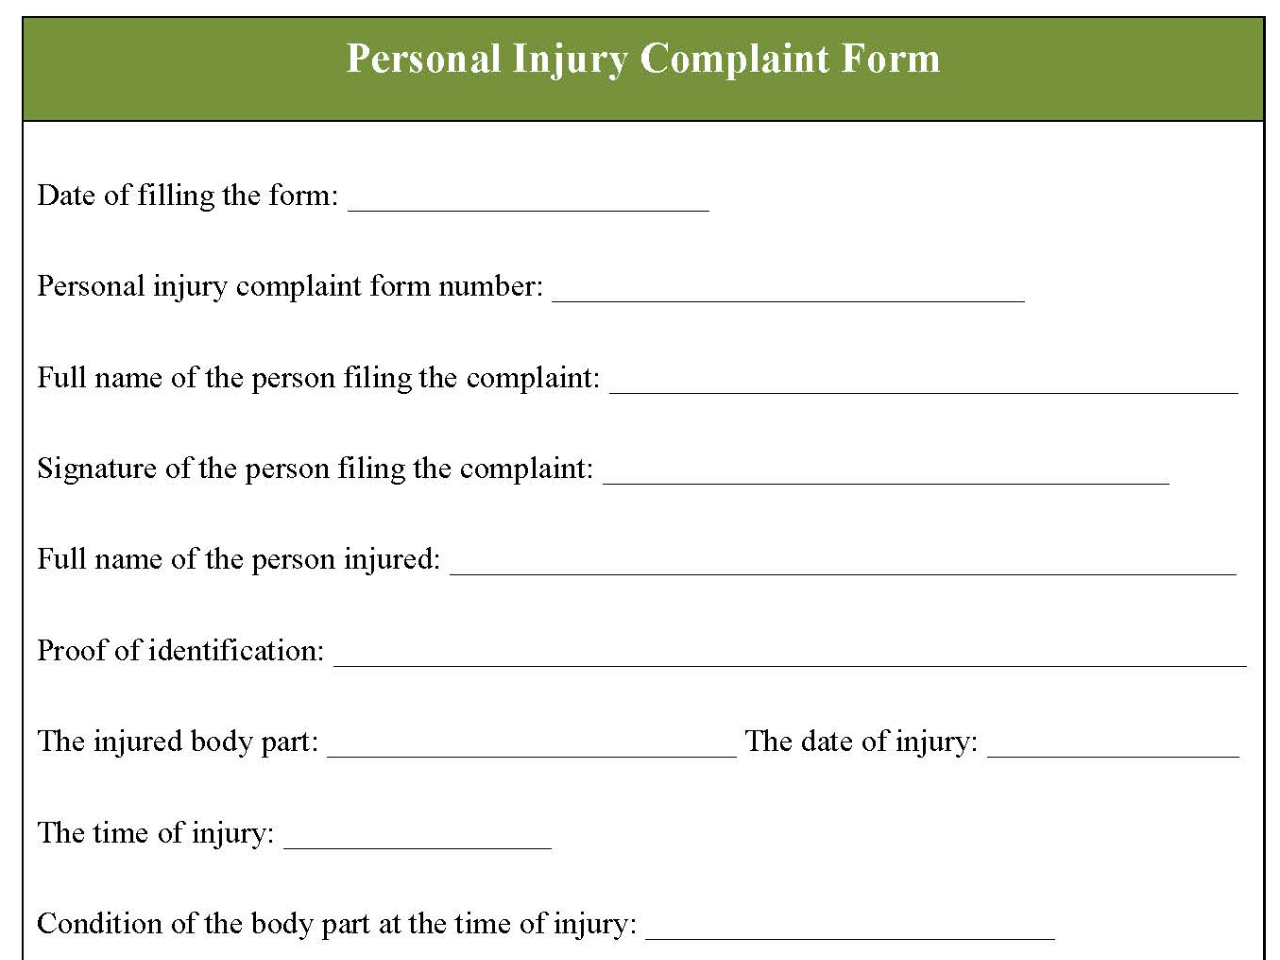 Personal Injury Complaint Form